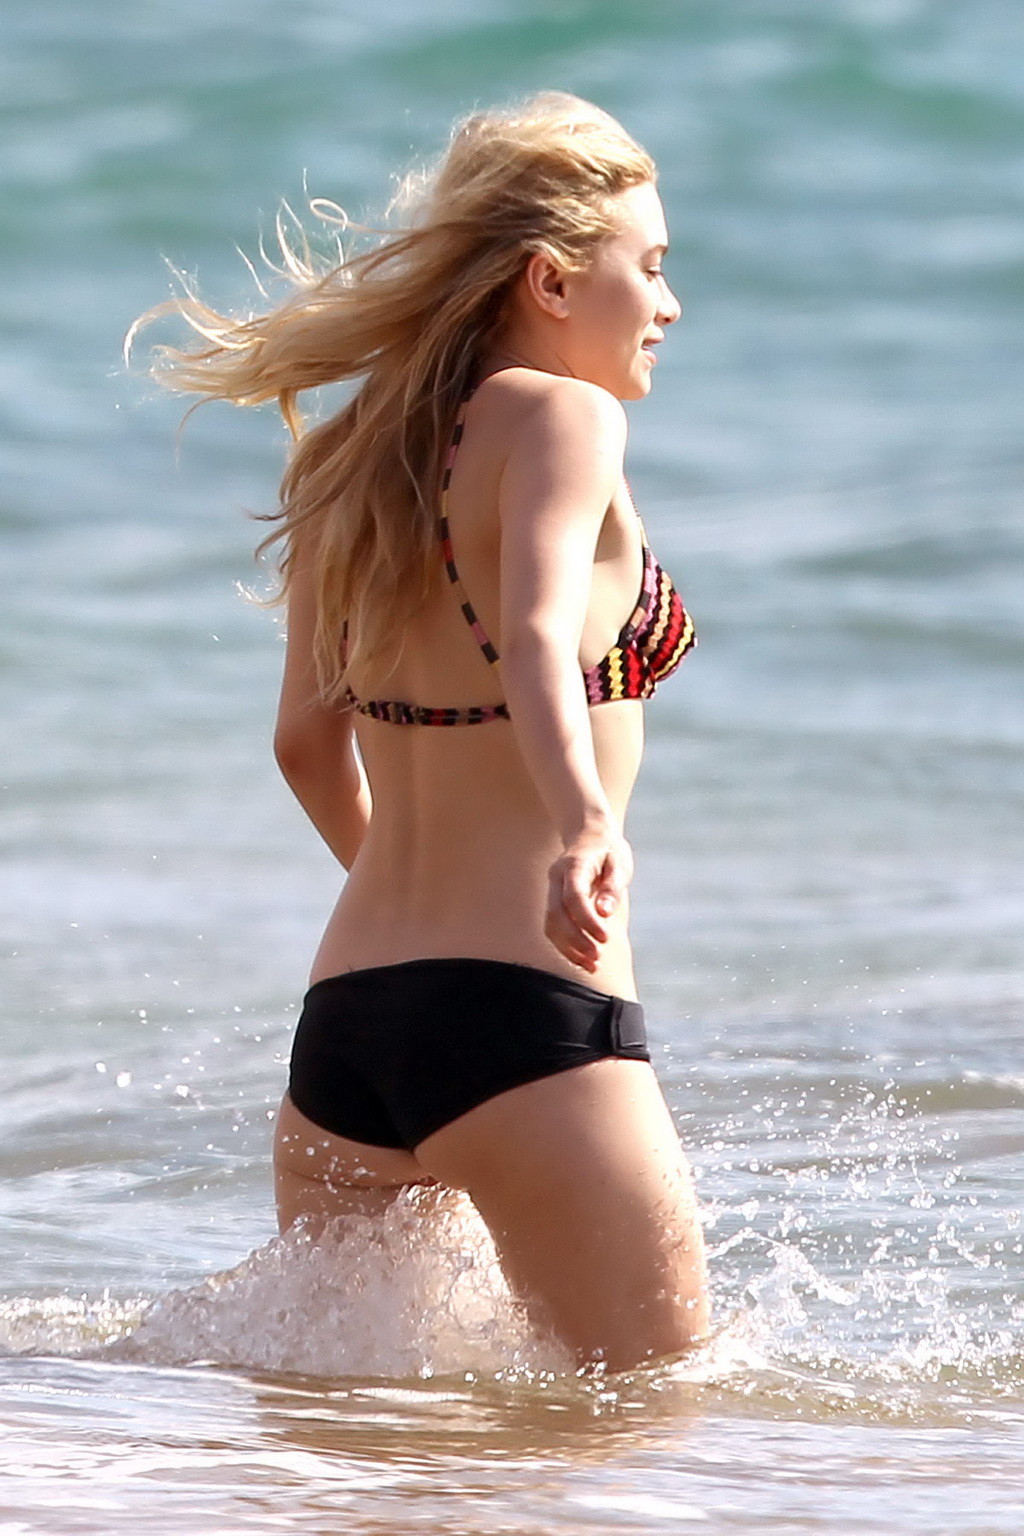 Ashley Olsen showing off her small tits and juicy ass in wet bikini at the beach #75262504